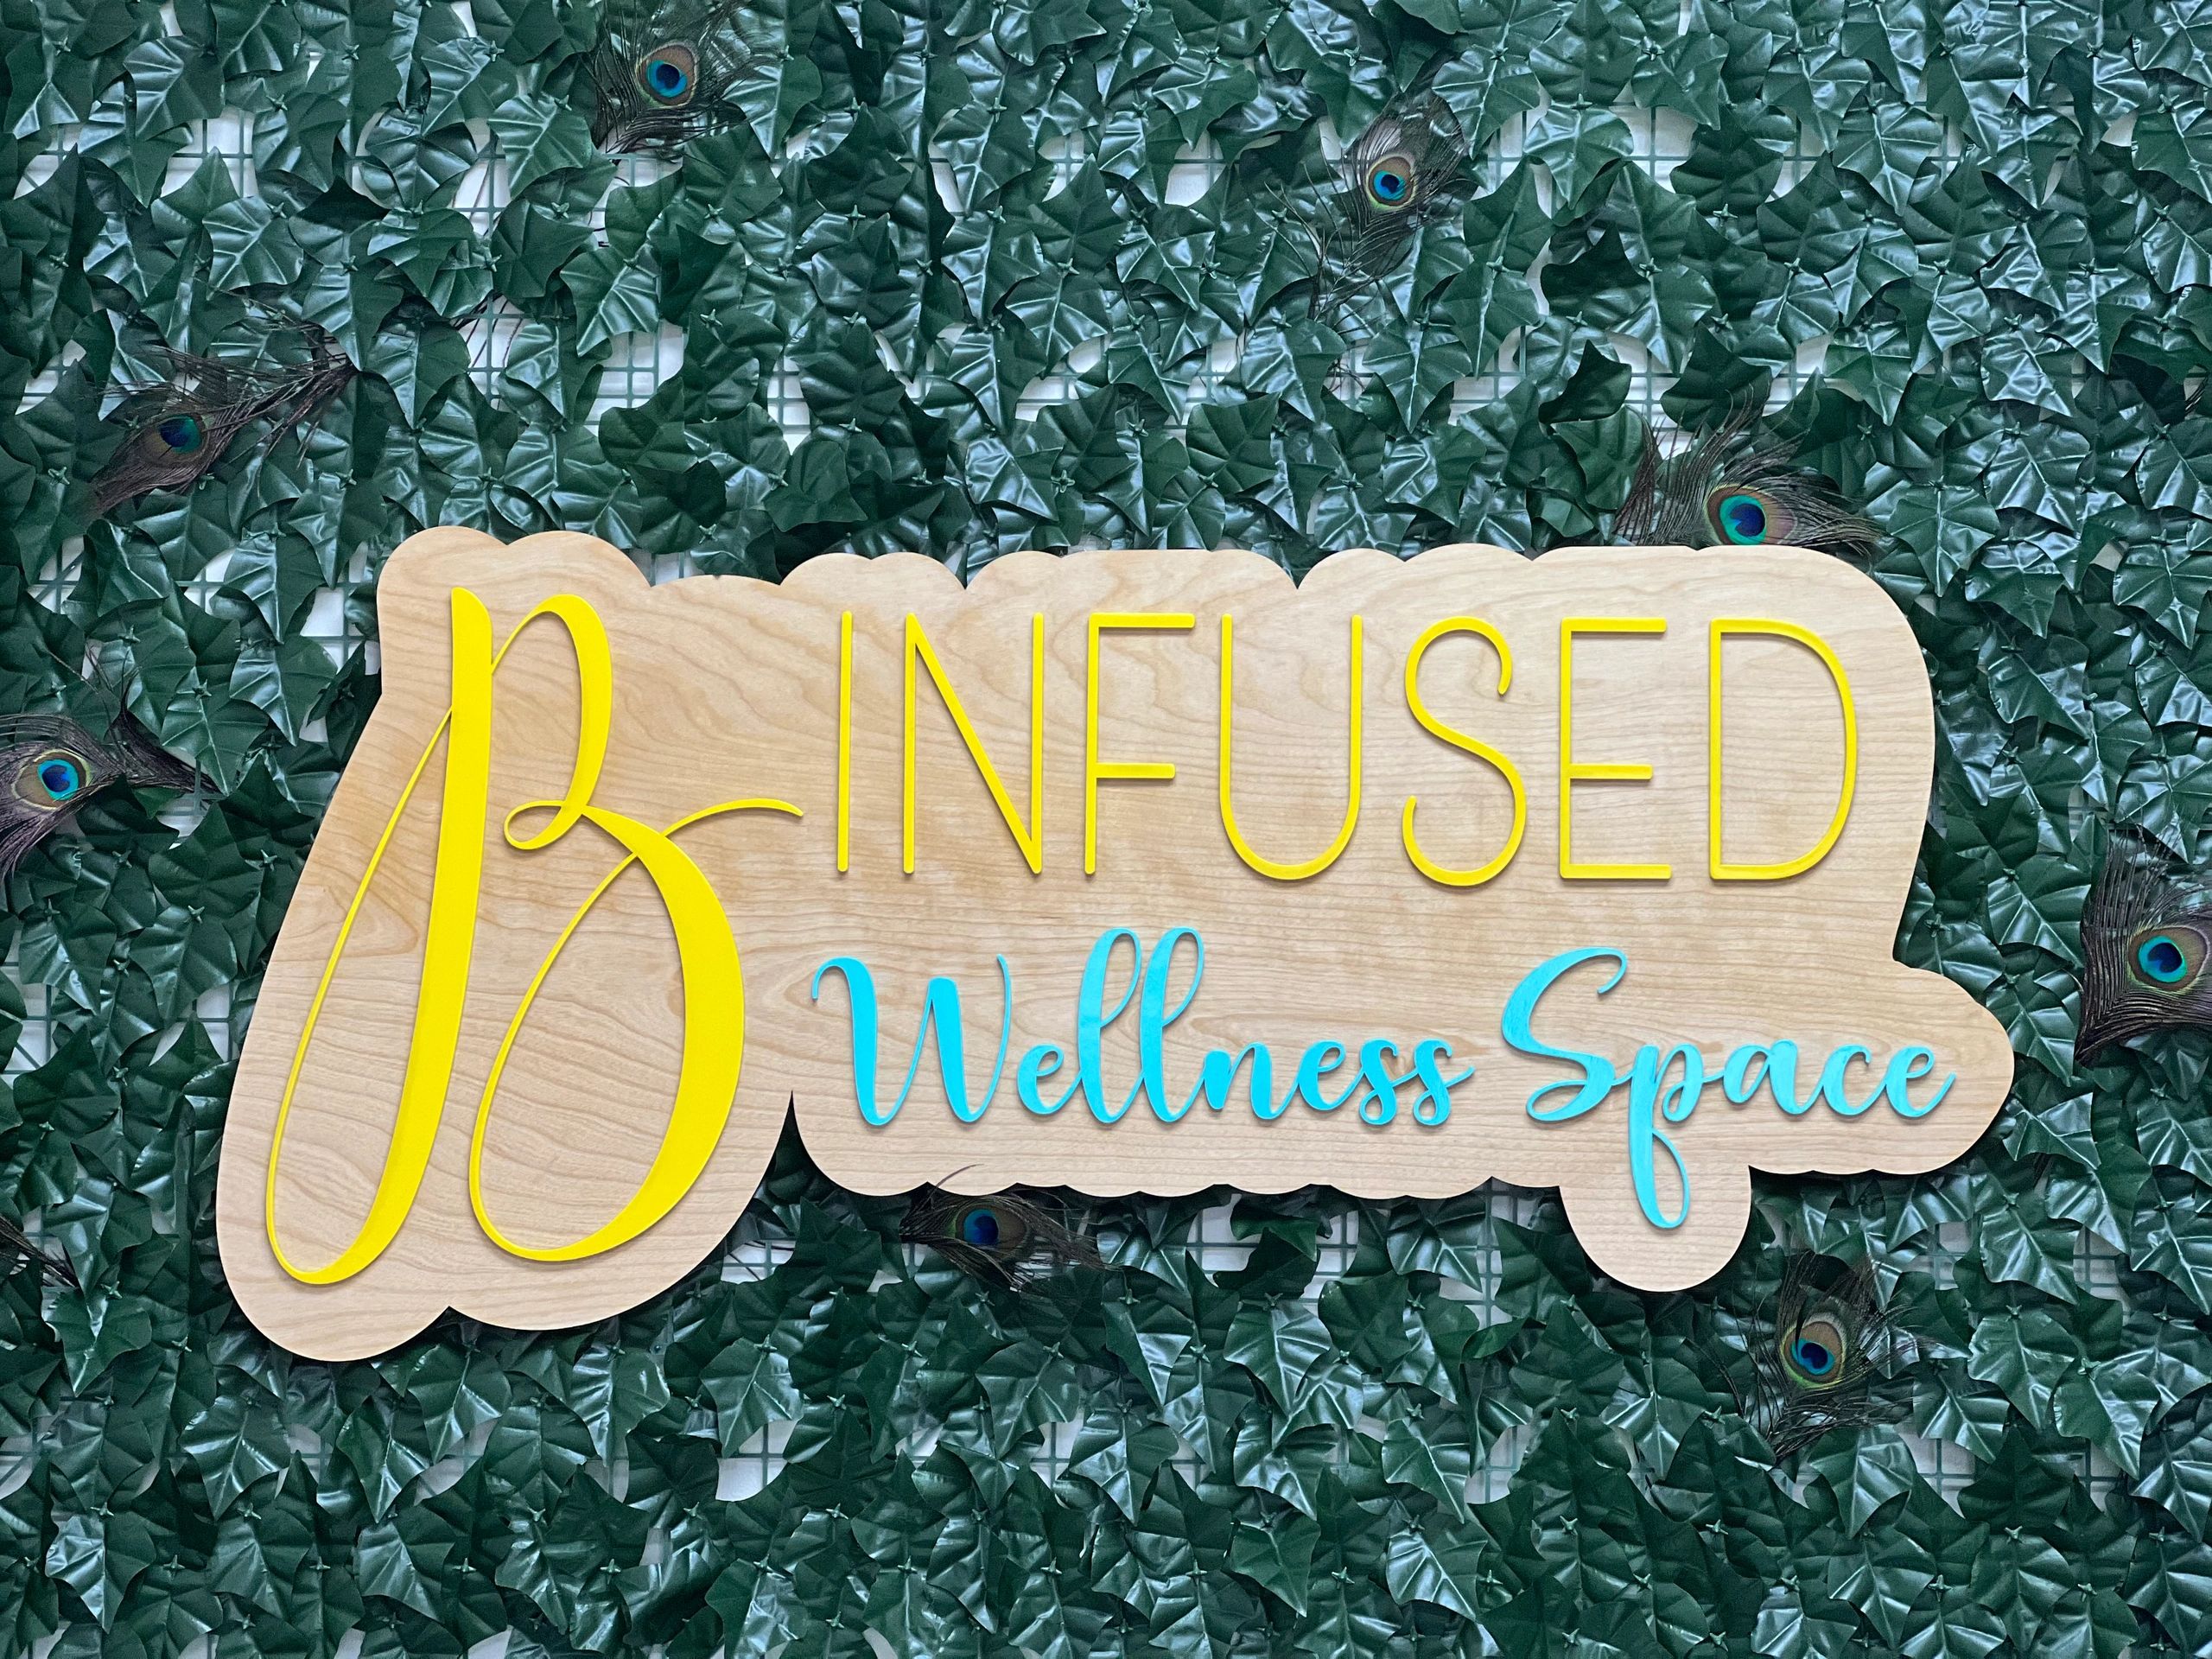 B Infused Wellness Space